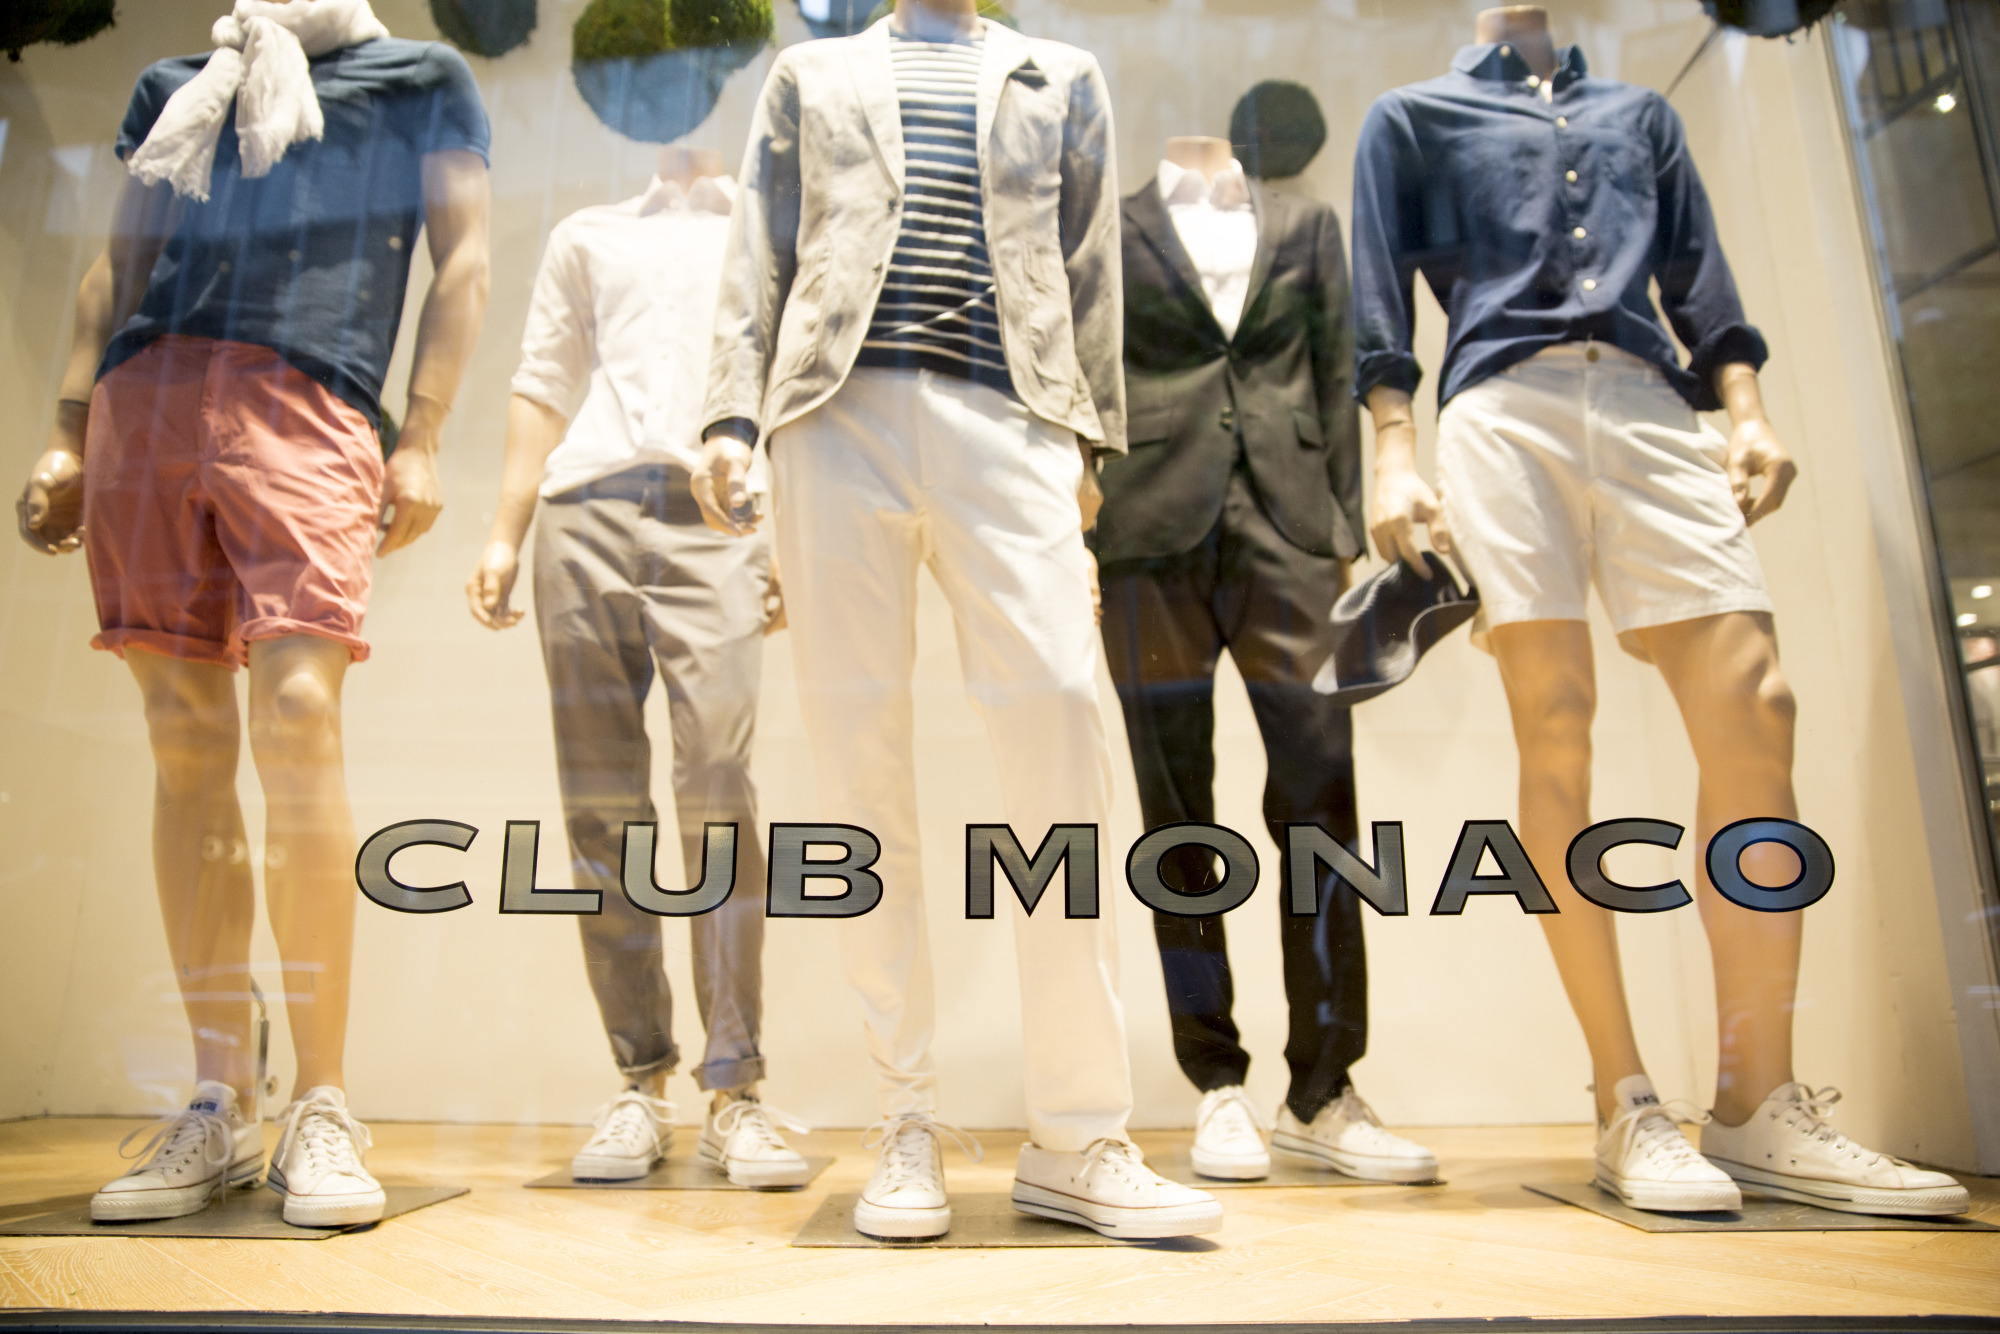 Ralph Lauren Sells Club Monaco Chain to Private Equity Firm - Bloomberg